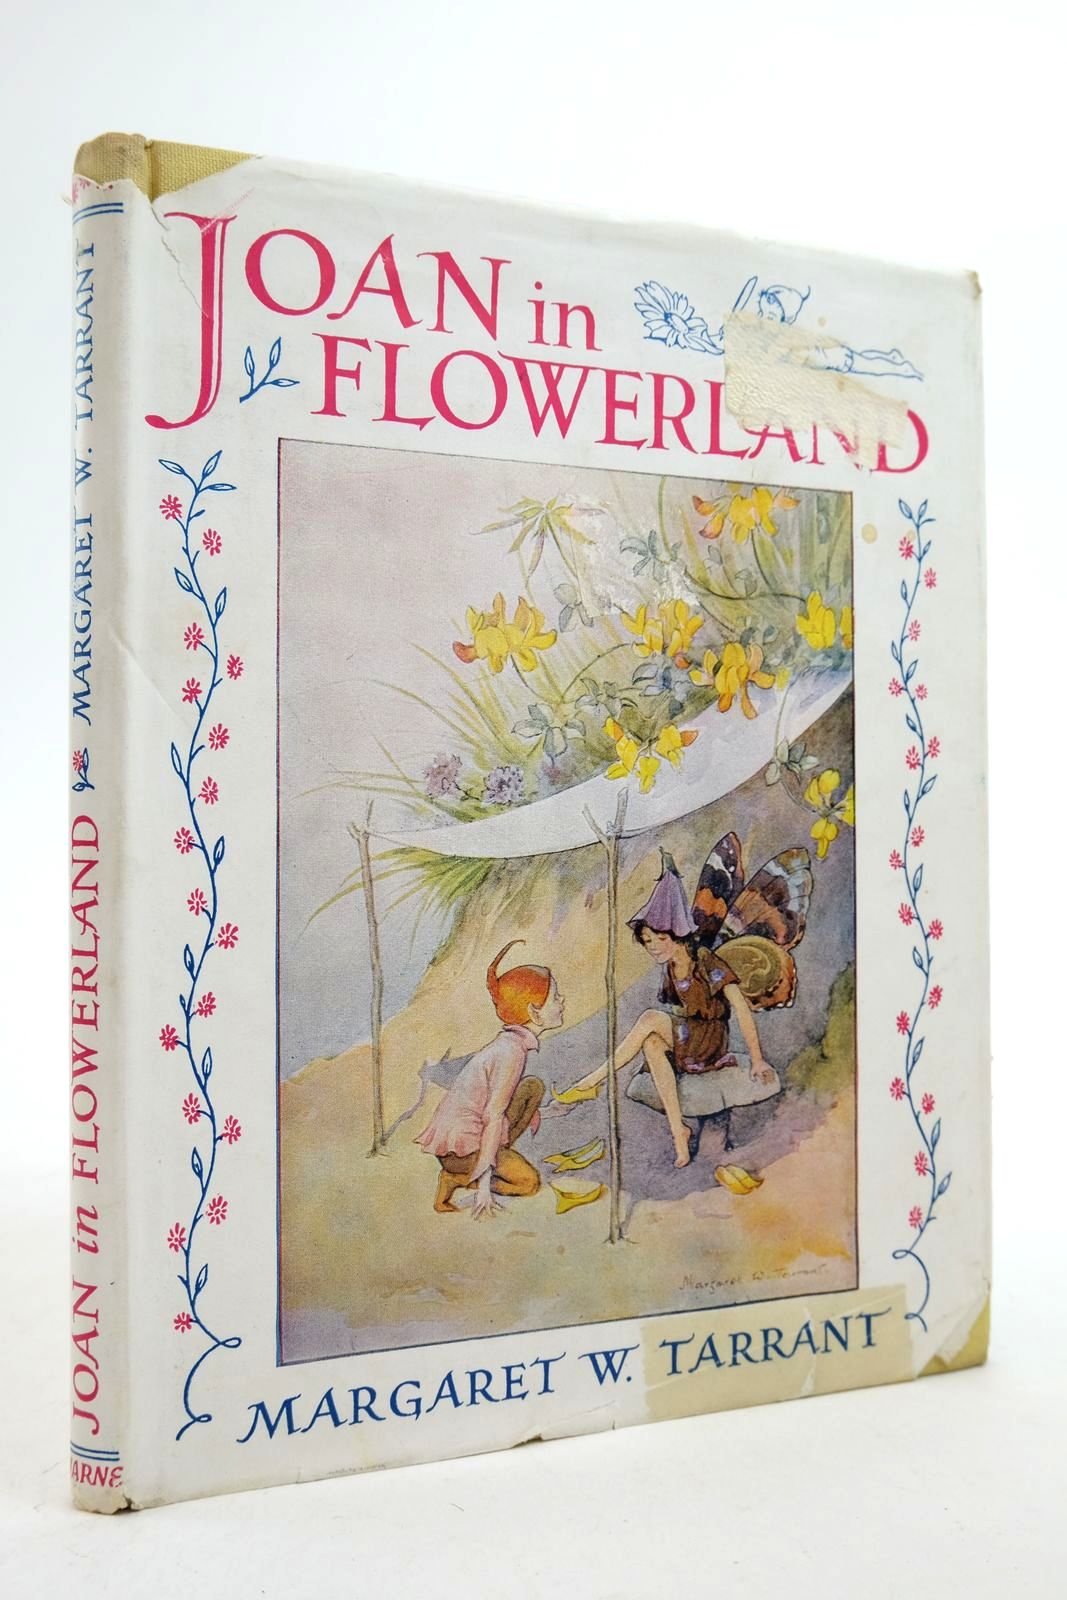 Photo of JOAN IN FLOWERLAND written by Tarrant, Margaret
Dutton, Lewis illustrated by Tarrant, Margaret published by Frederick Warne & Co Ltd. (STOCK CODE: 2140185)  for sale by Stella & Rose's Books